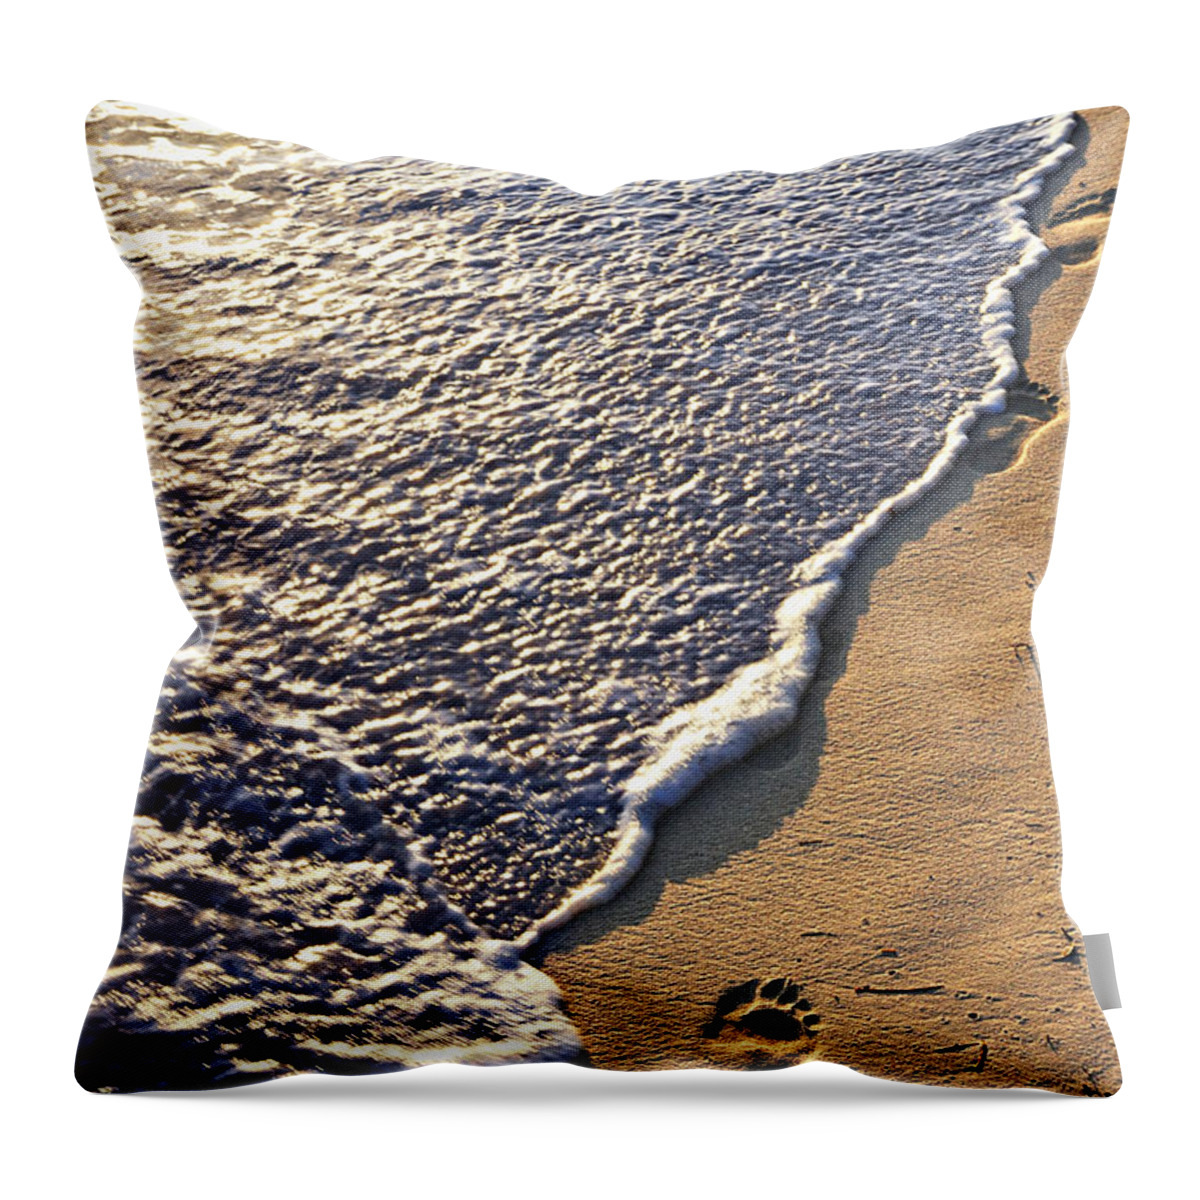 Footstep Throw Pillow featuring the photograph Tropical beach with footprints by Elena Elisseeva